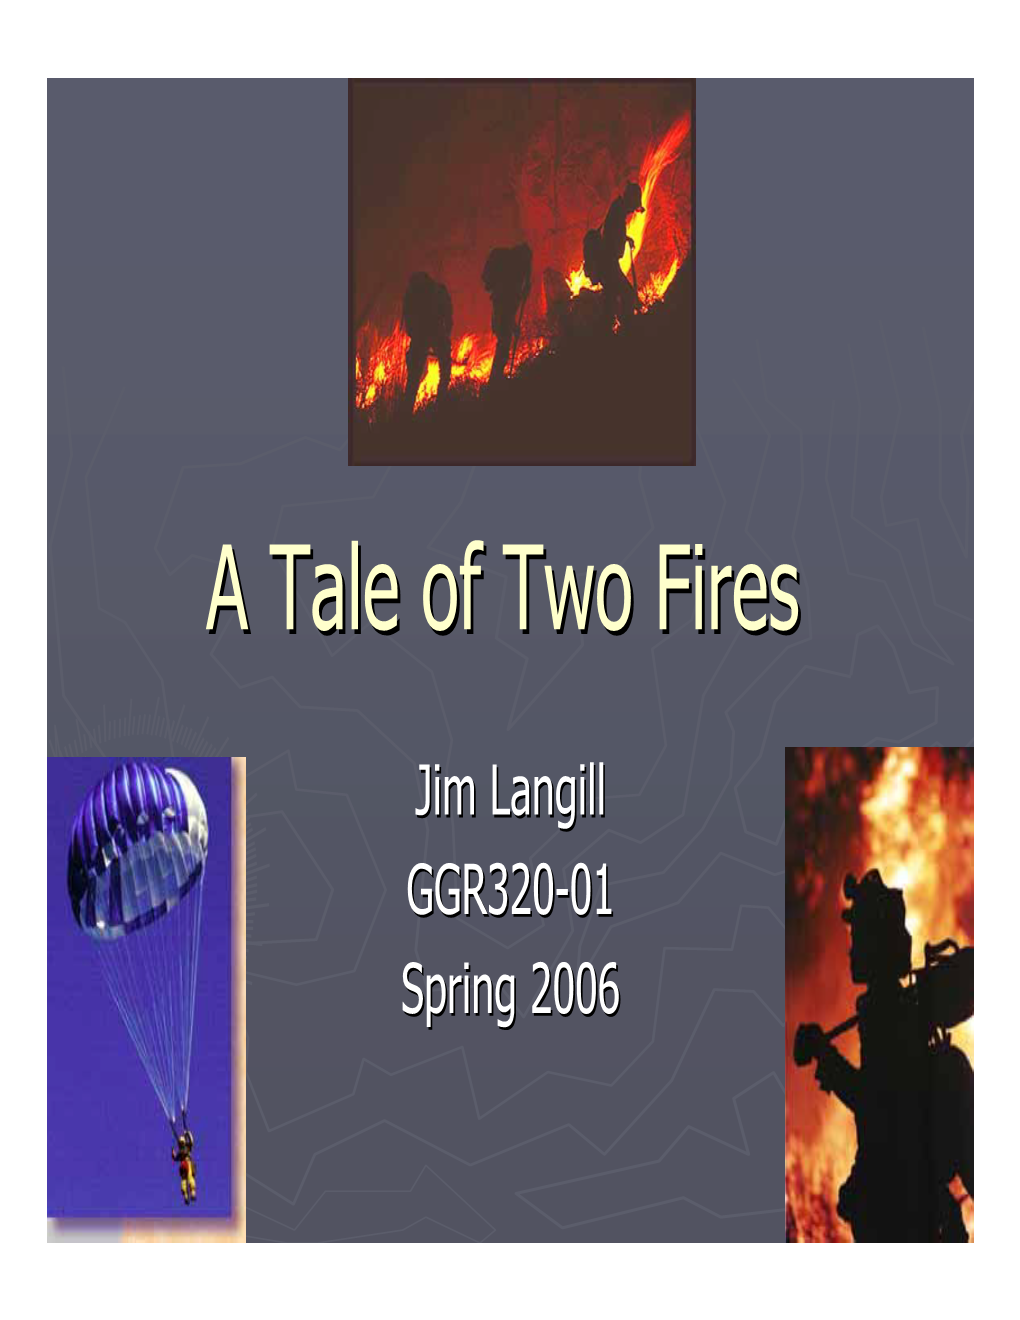 A Tale of Two Fires